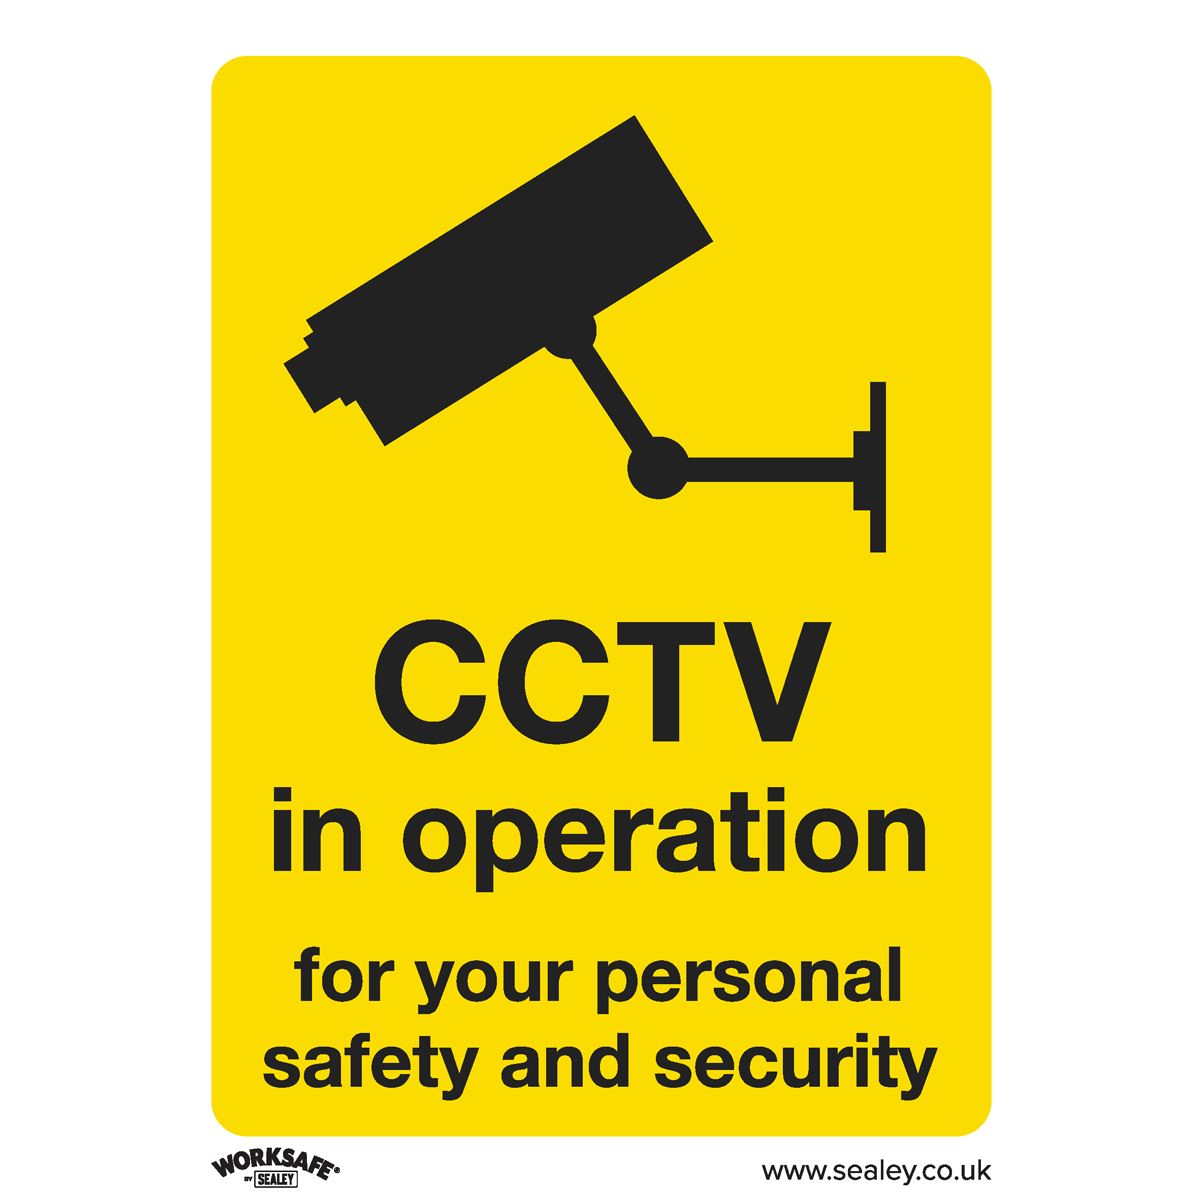 Worksafe by Sealey Warning Safety Sign - CCTV - Self-Adhesive Vinyl - Pack of 10